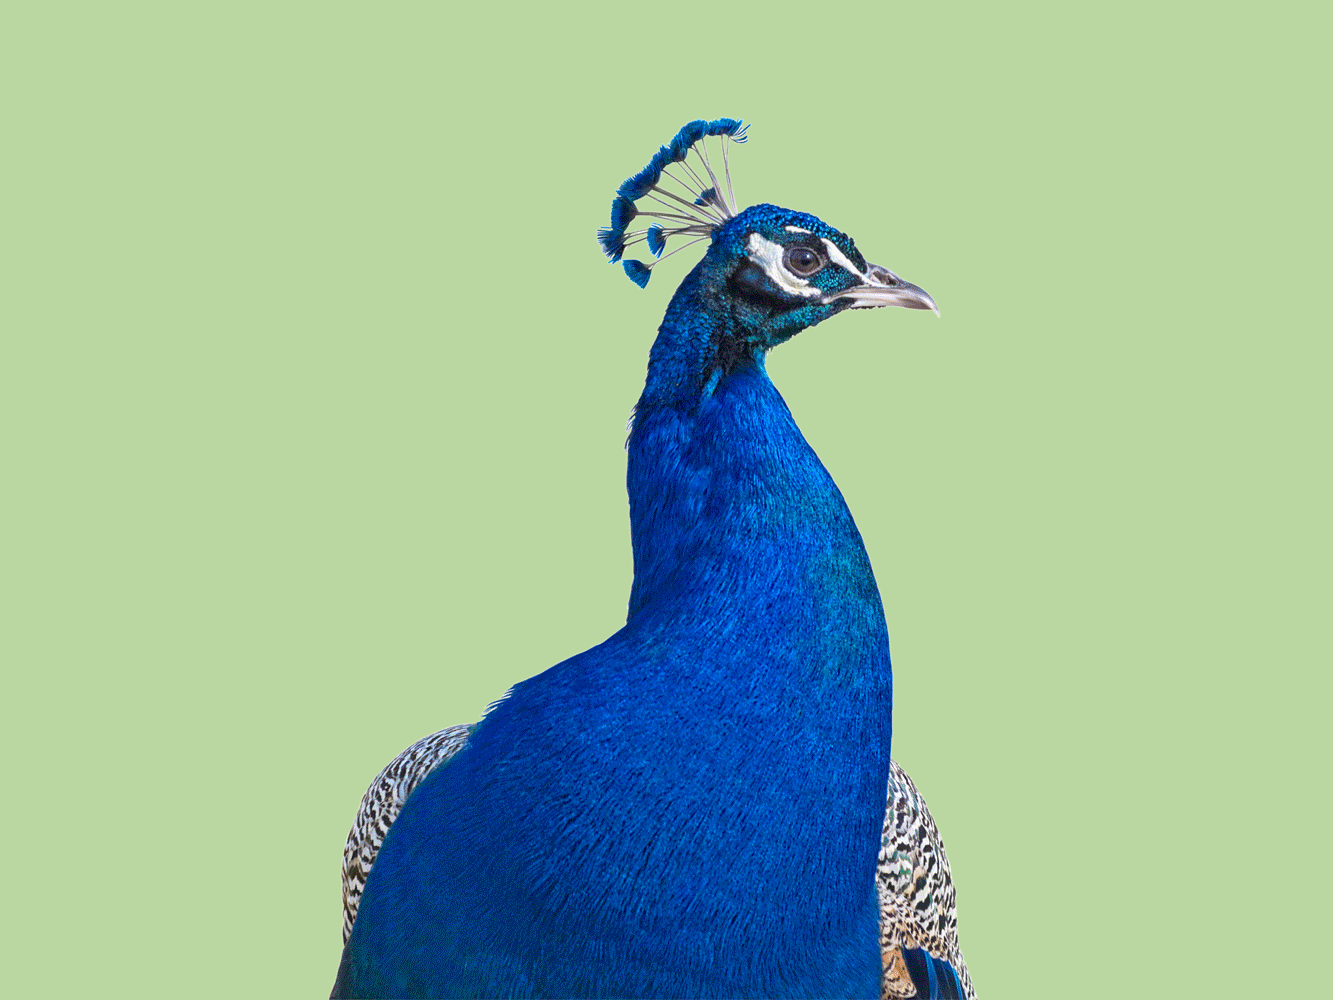 What Is an Ambivert: peacock animation showing feathers